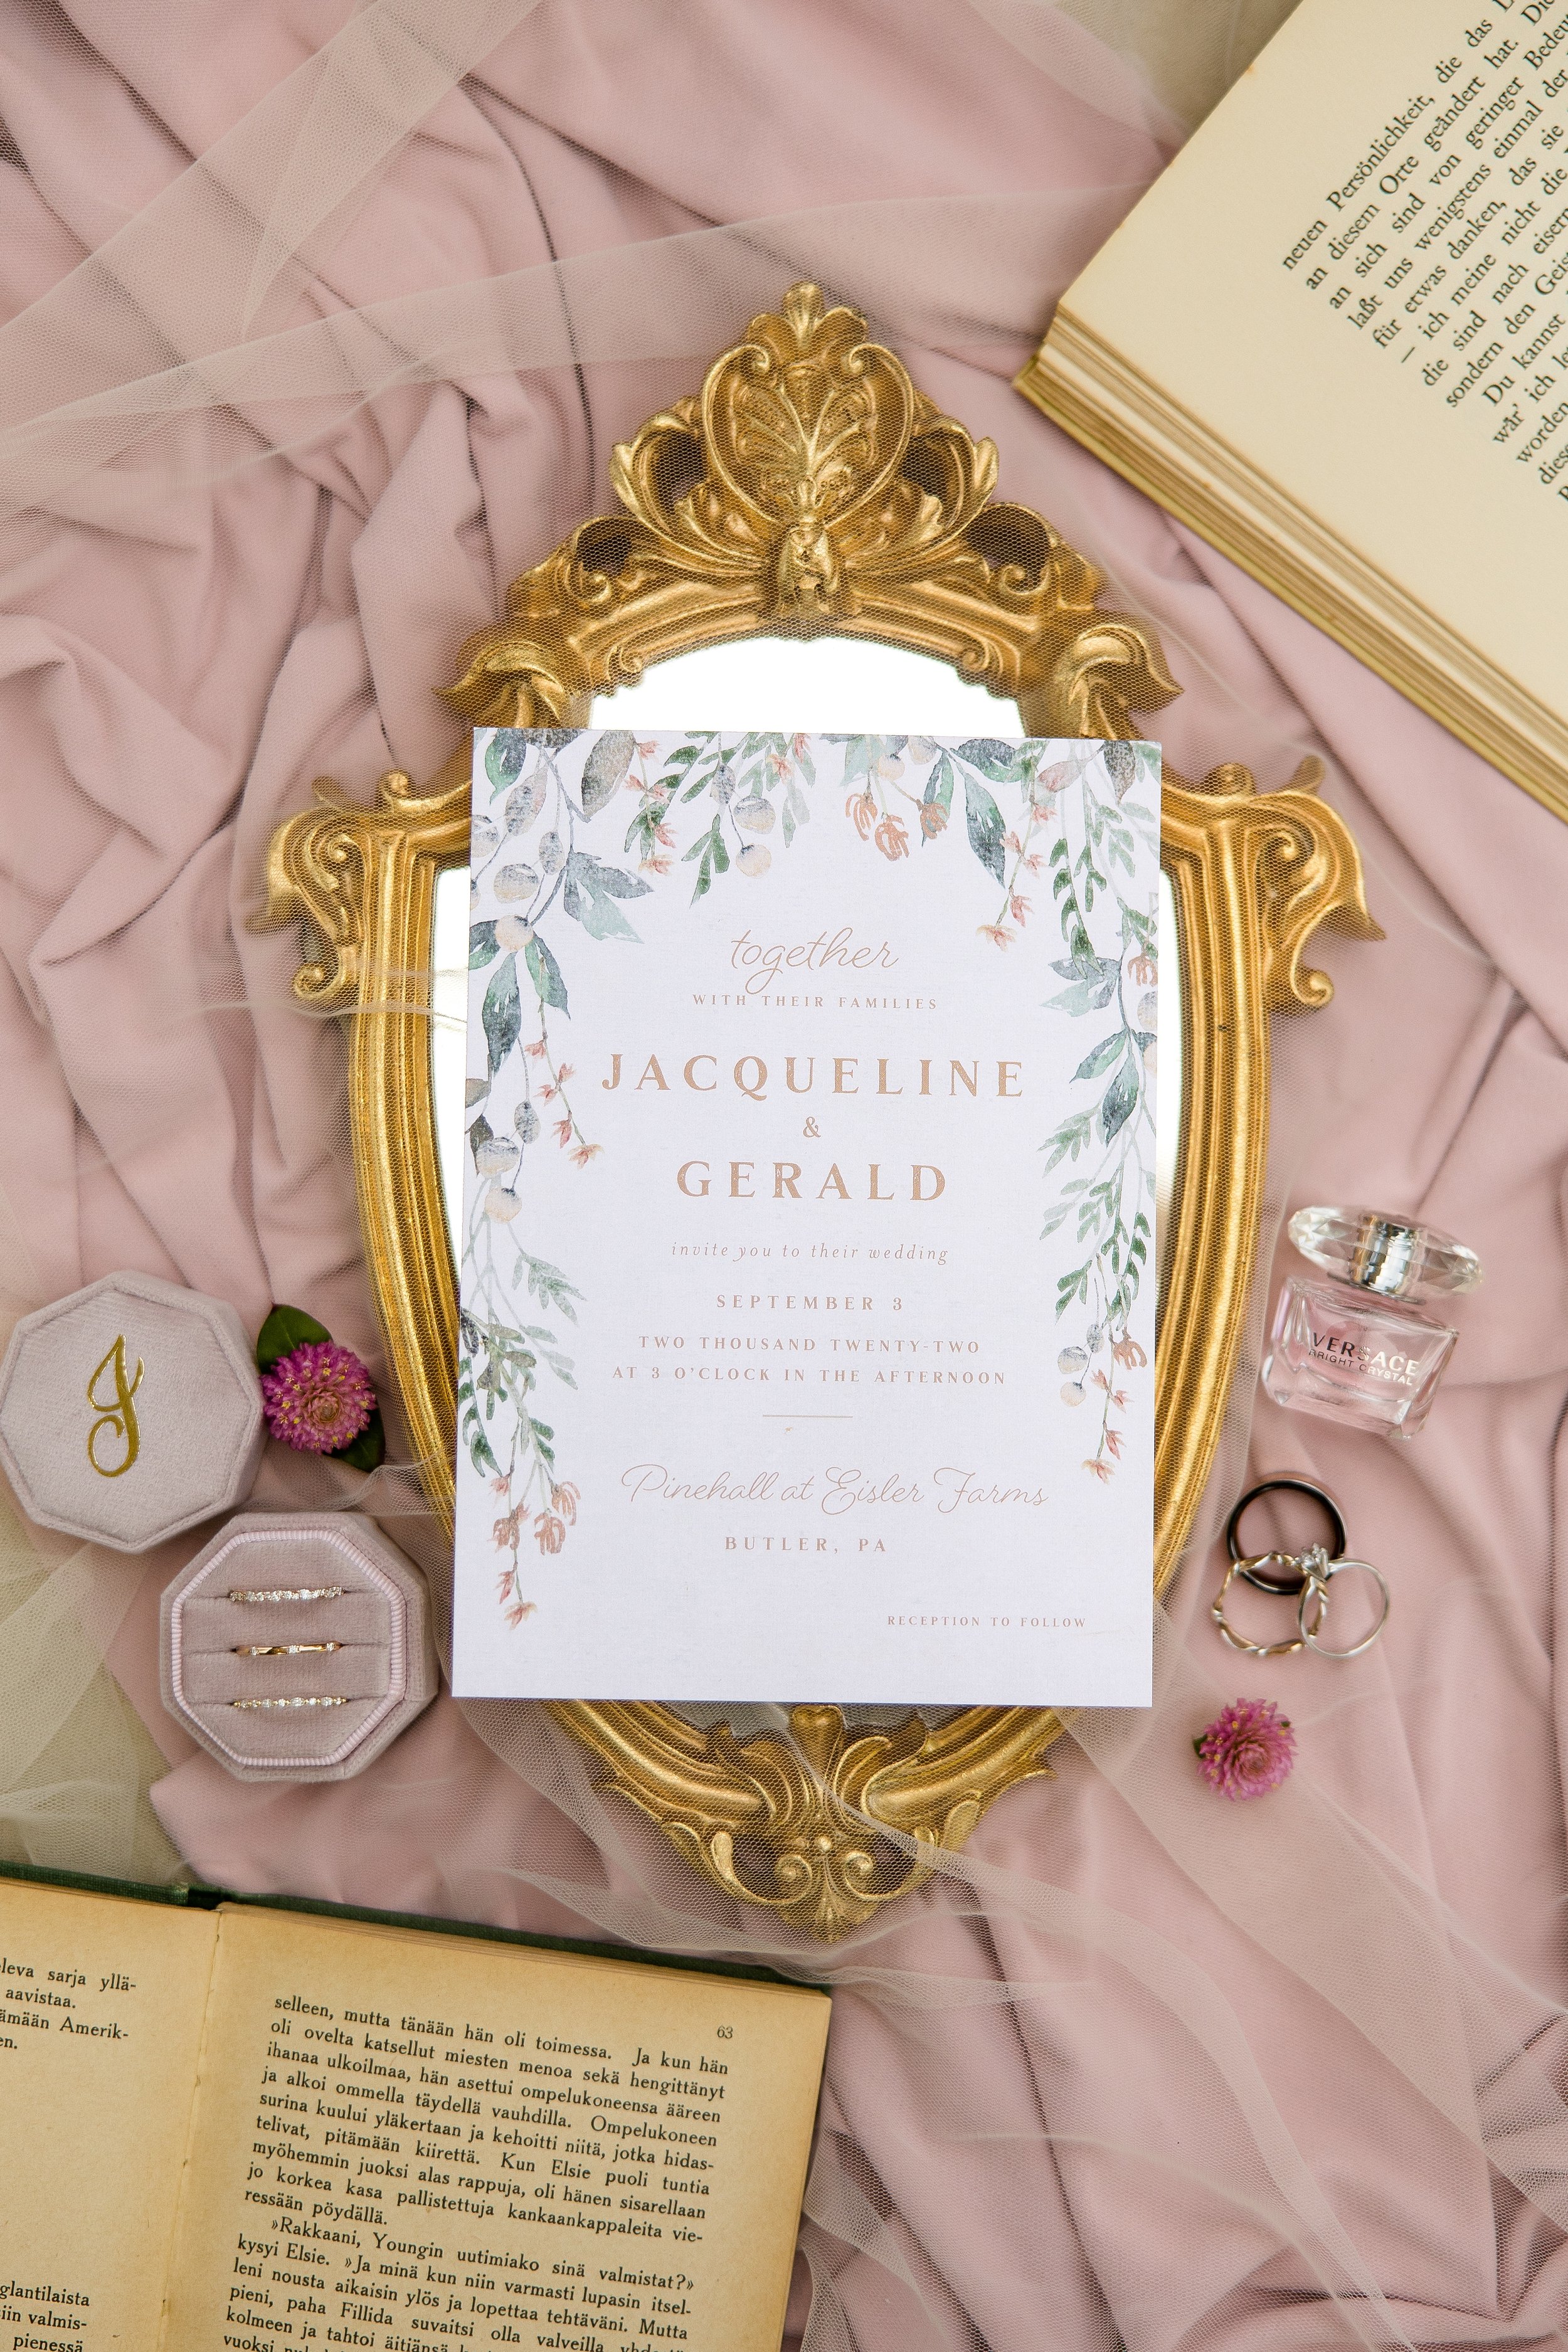  Jackie &amp; Gerald are literary lovers who incorporated so many books into their wedding day. I decided to borrow a few from their reception area to incorporate into their details photos - and I’m so glad I did! I am so excited about how these deta